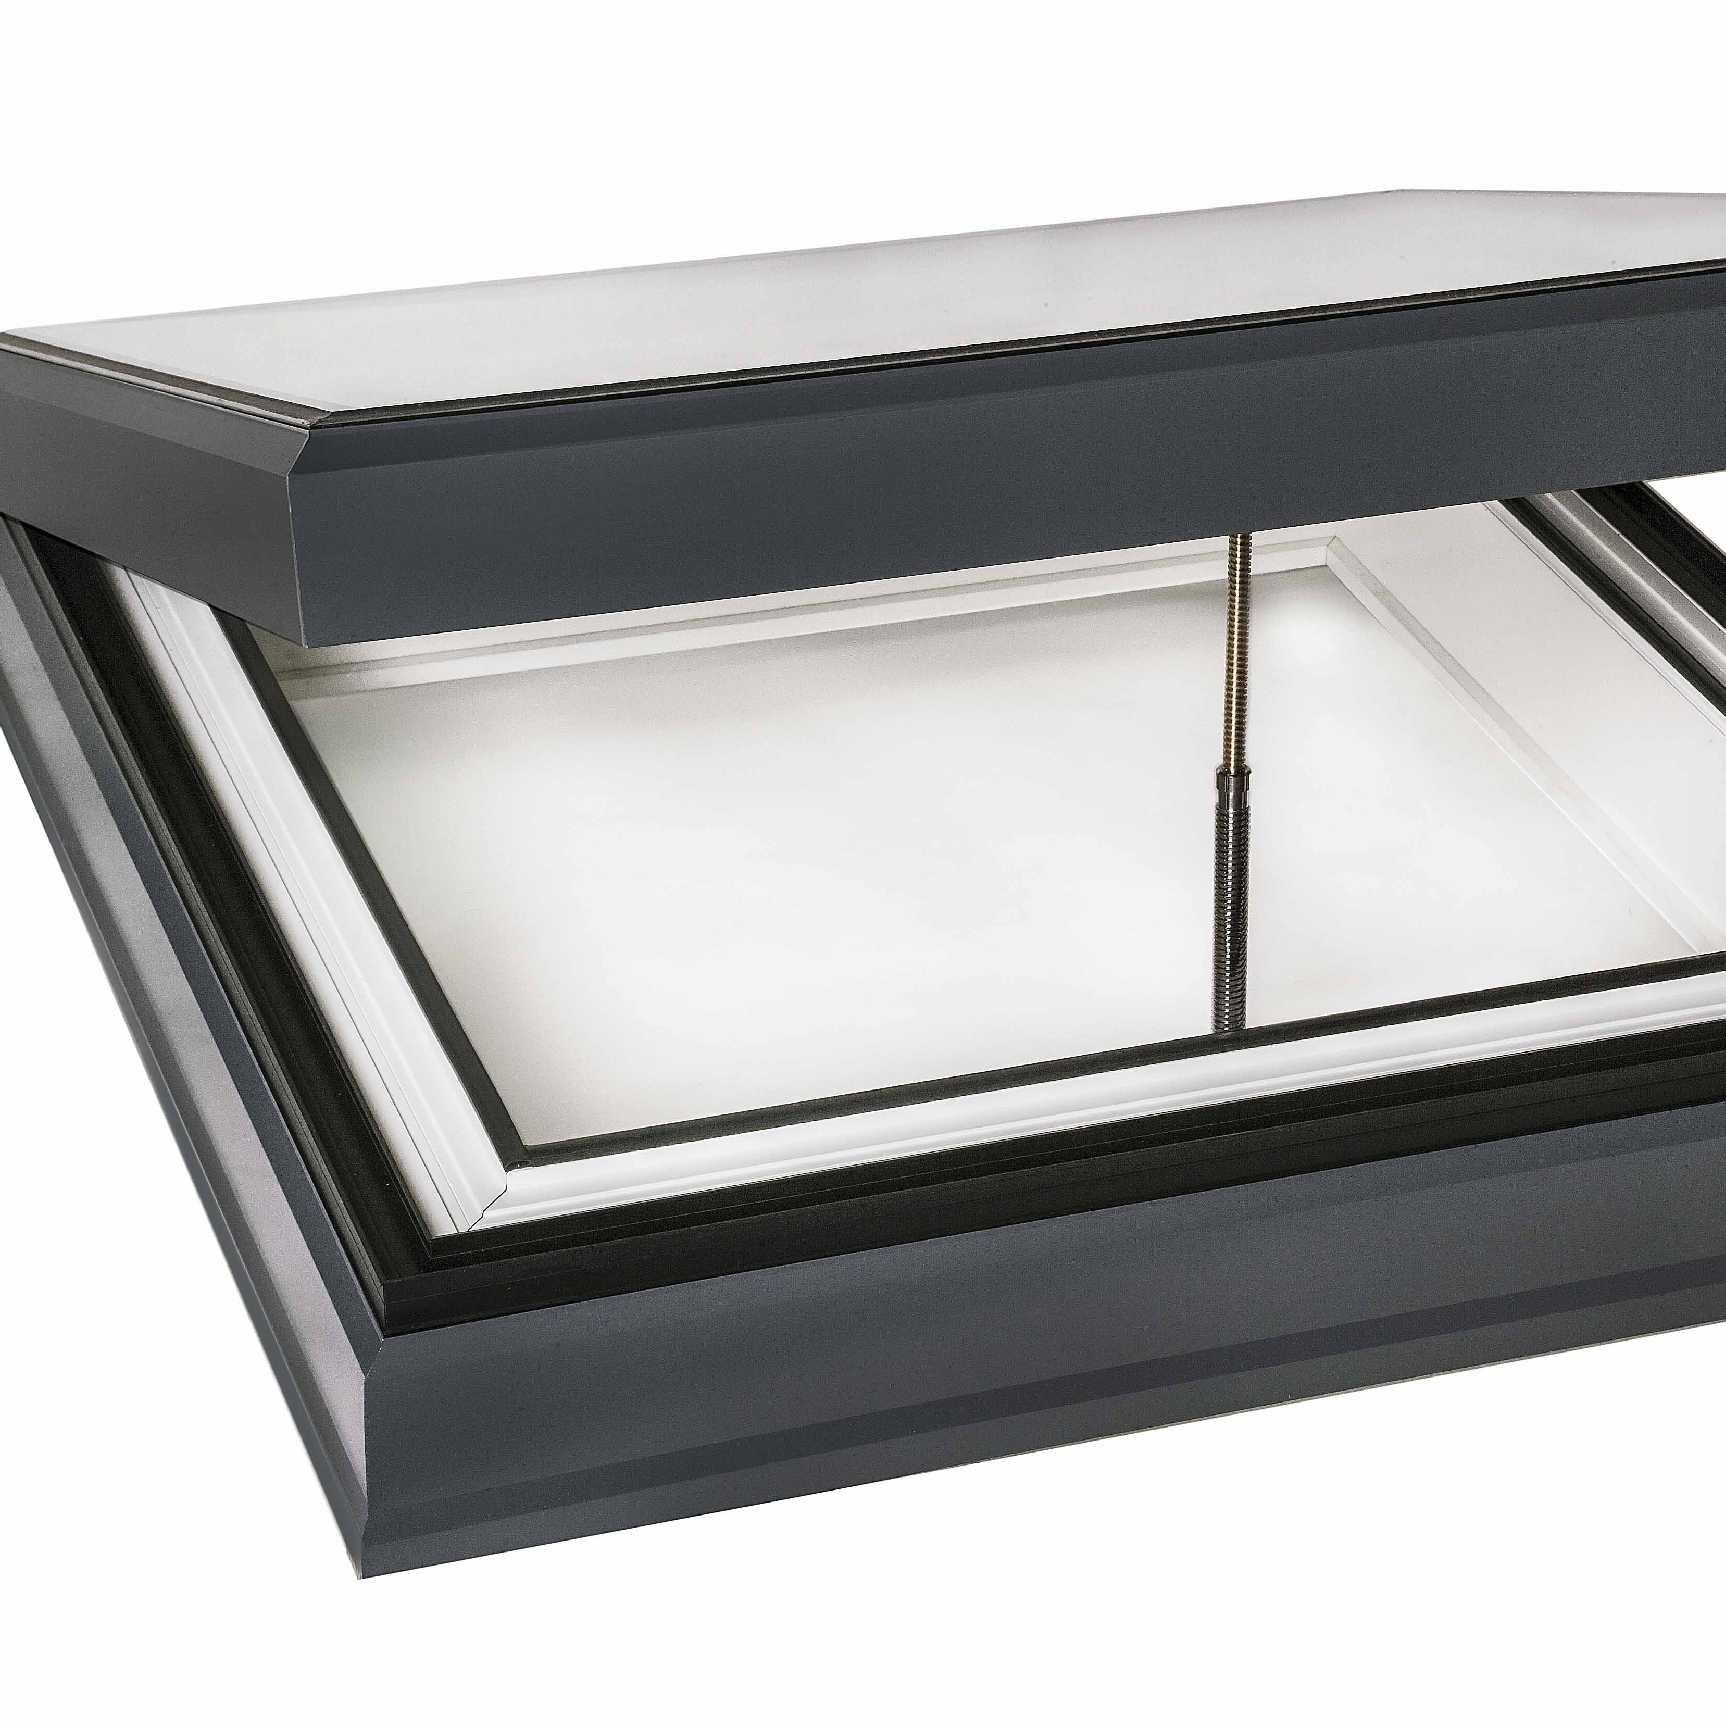 Great deals on EcoGard Flat Roof light, Triple Glazed, Electric Opening, 1,000mm x 1,000mm